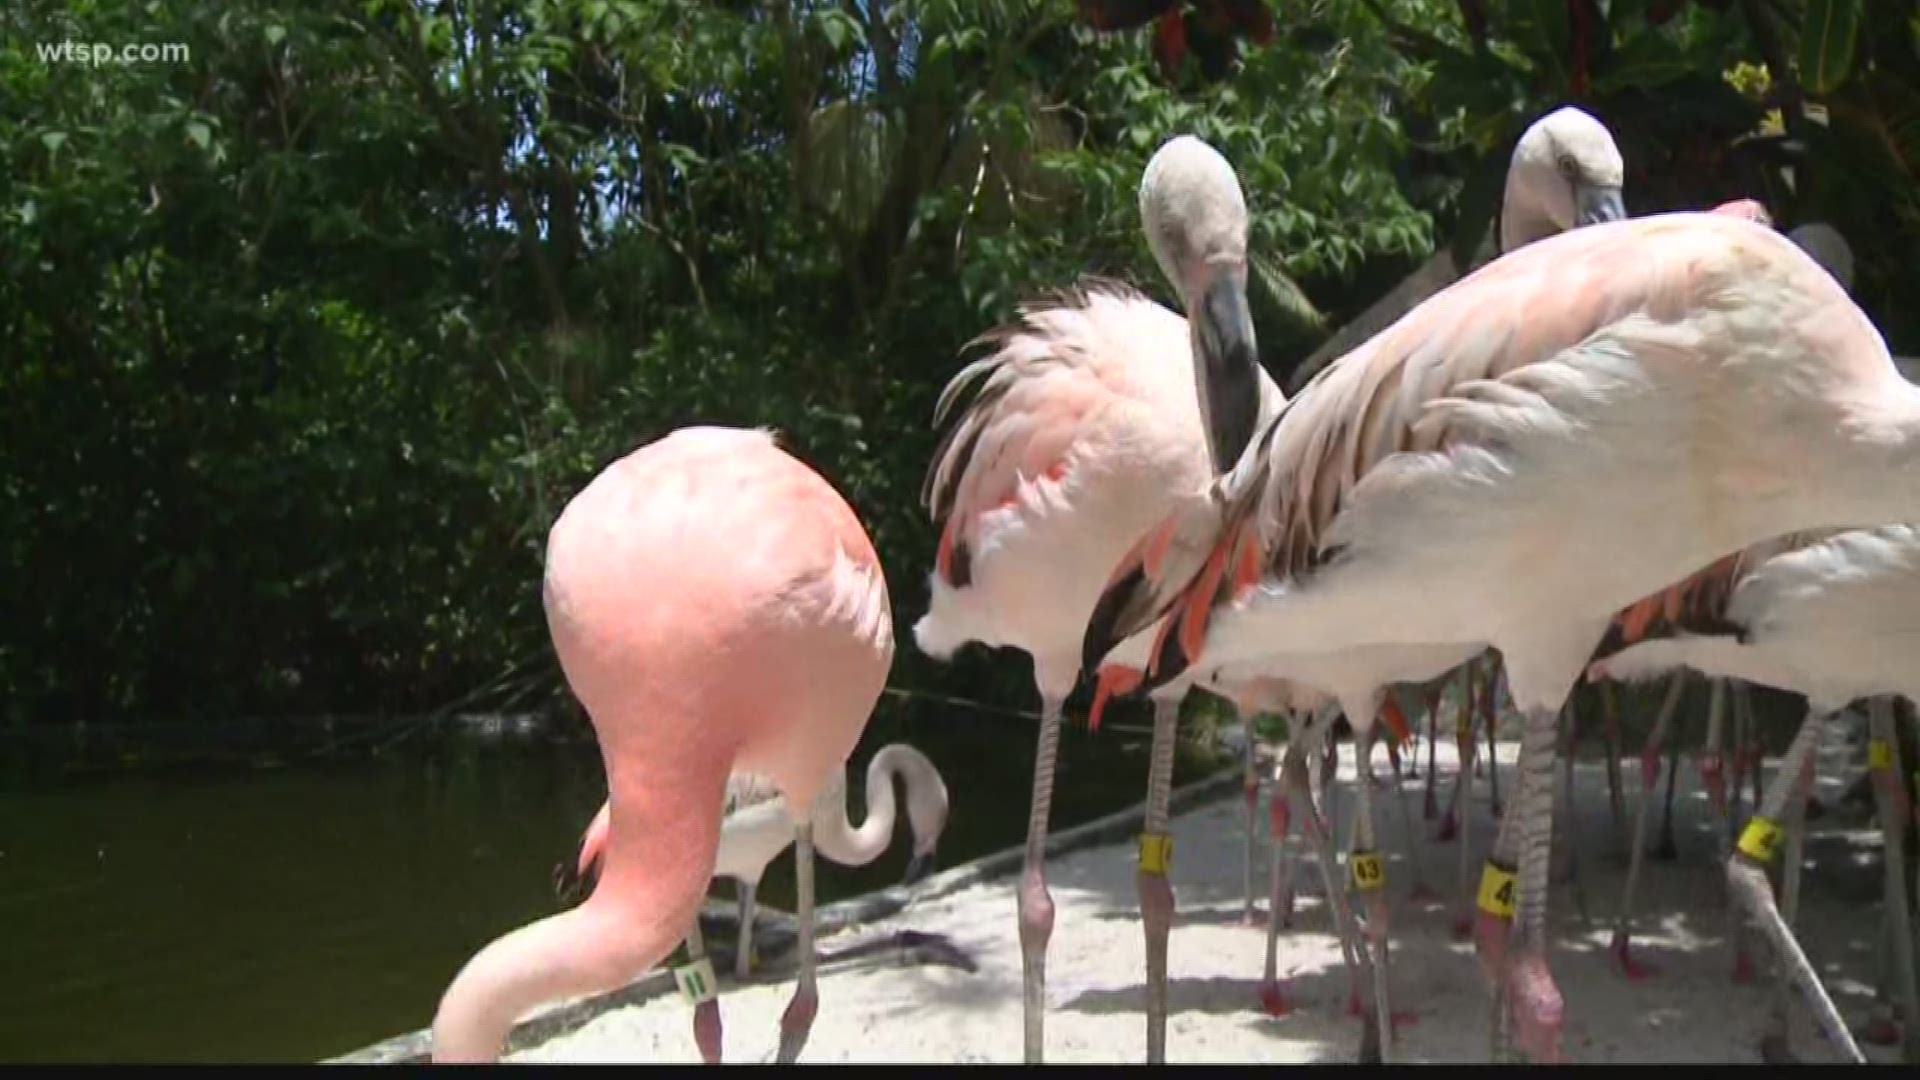 It took thousands of dollars to determine the 47-year-old Orlando man can stand trial for killing the popular Pinky at Busch Gardens. We talk to experts to find out why taxpayer money goes to determining who is fit for trial and who isn't.